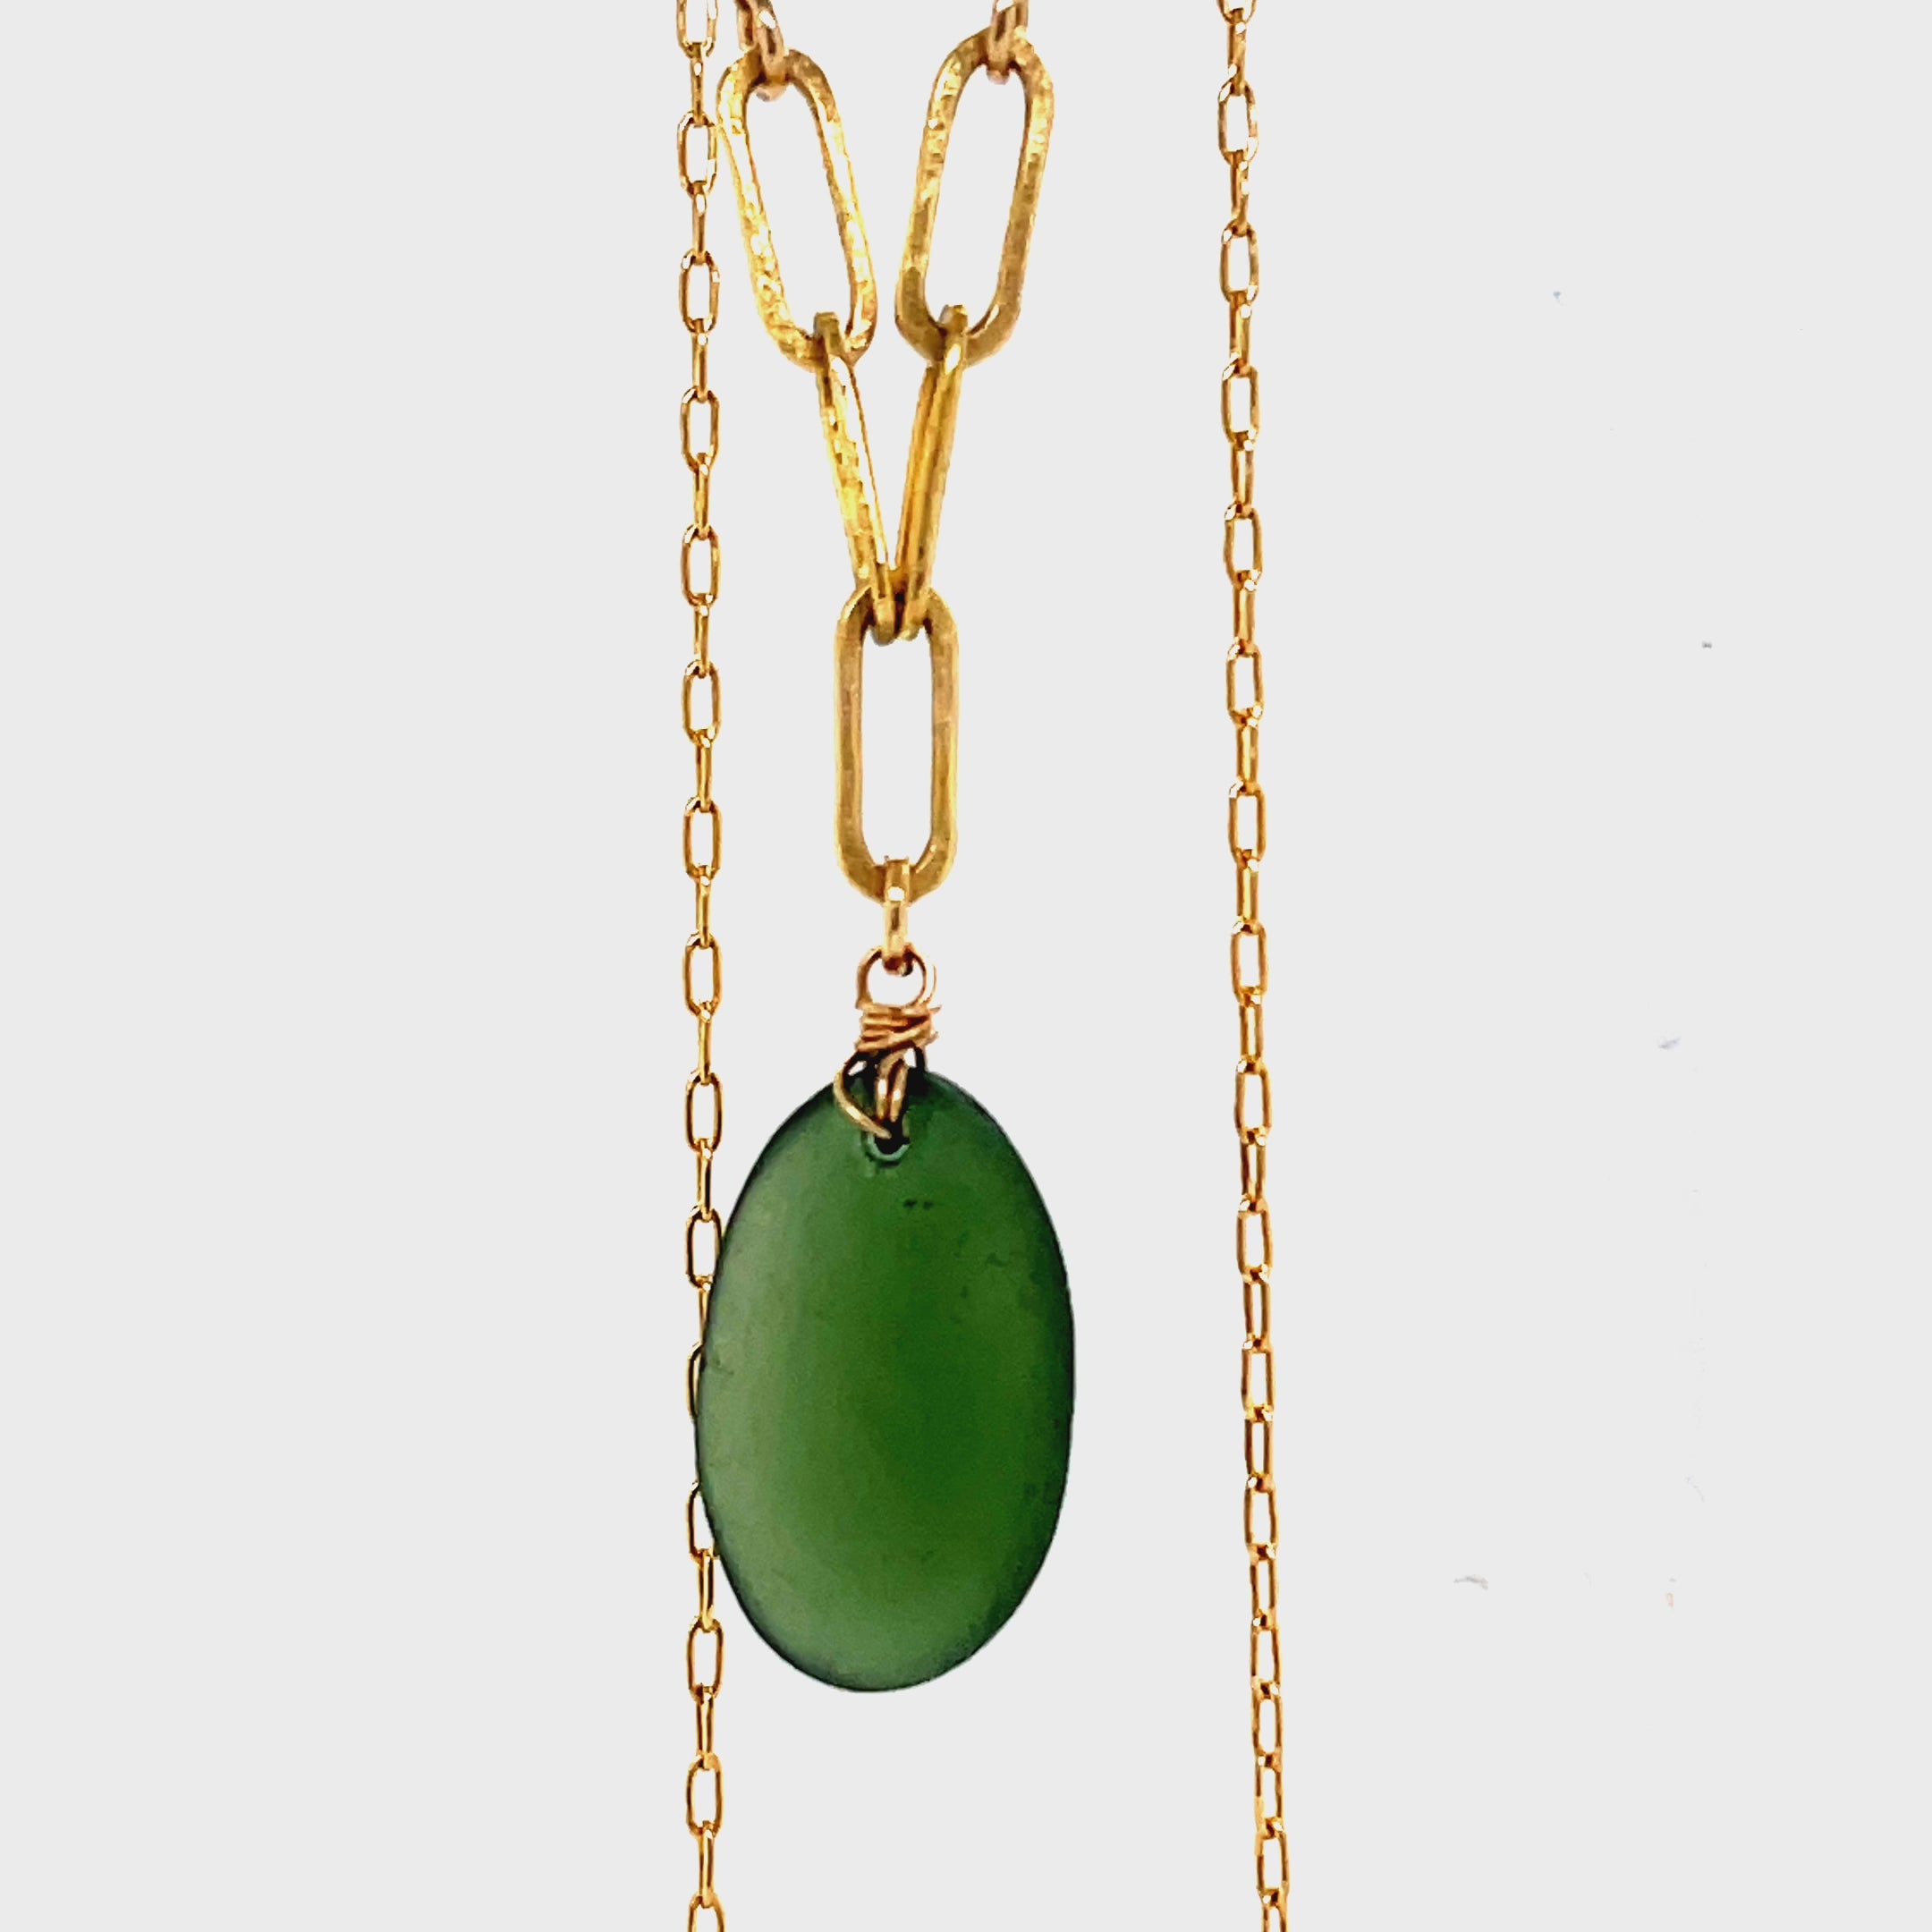 Gold Chain Necklace - Matte Gold Hammered Necklace - Green Gold Necklace Charm